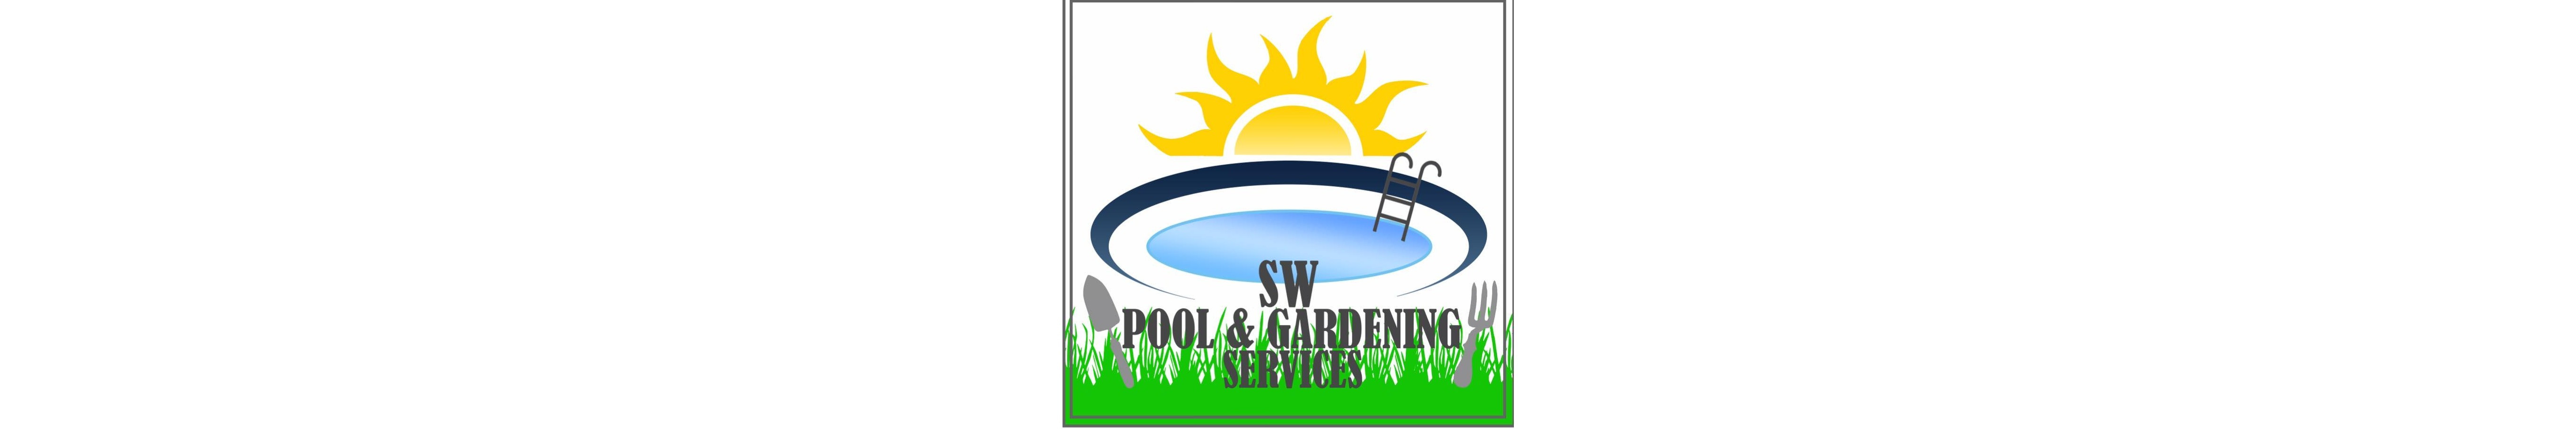 We offer a wide range of gardening and pool services